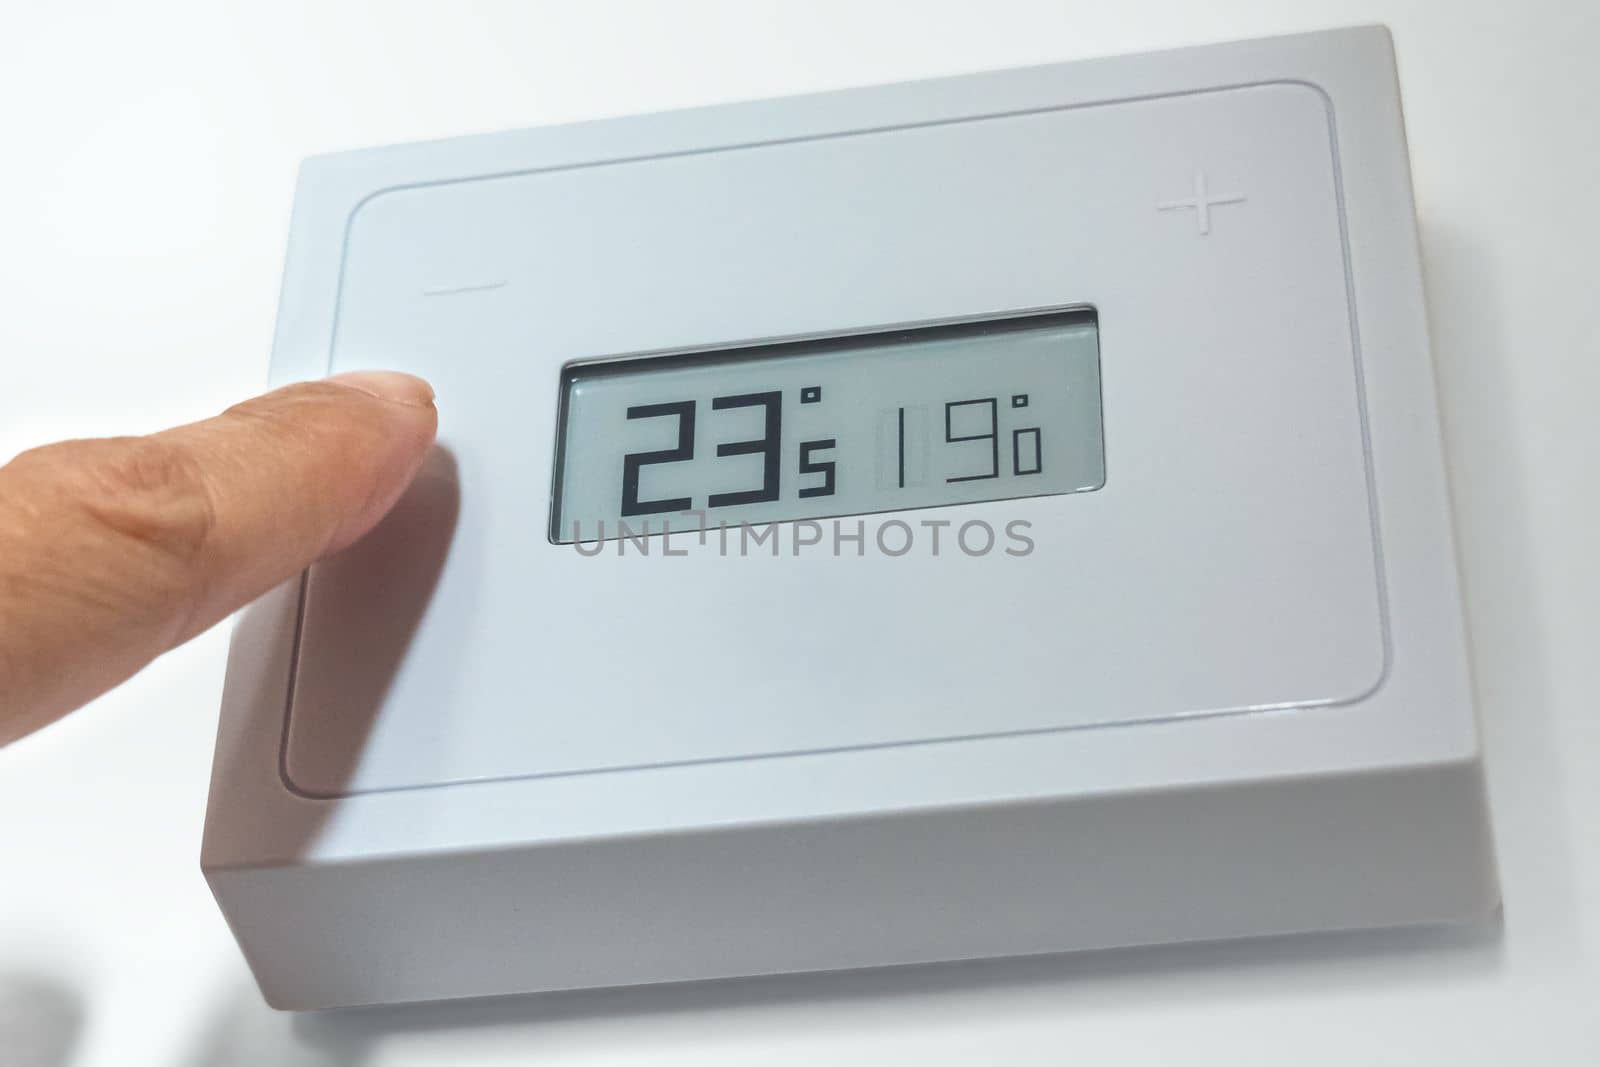 Lowering the temperature of a home thermostat due to energy crisis. Close up.